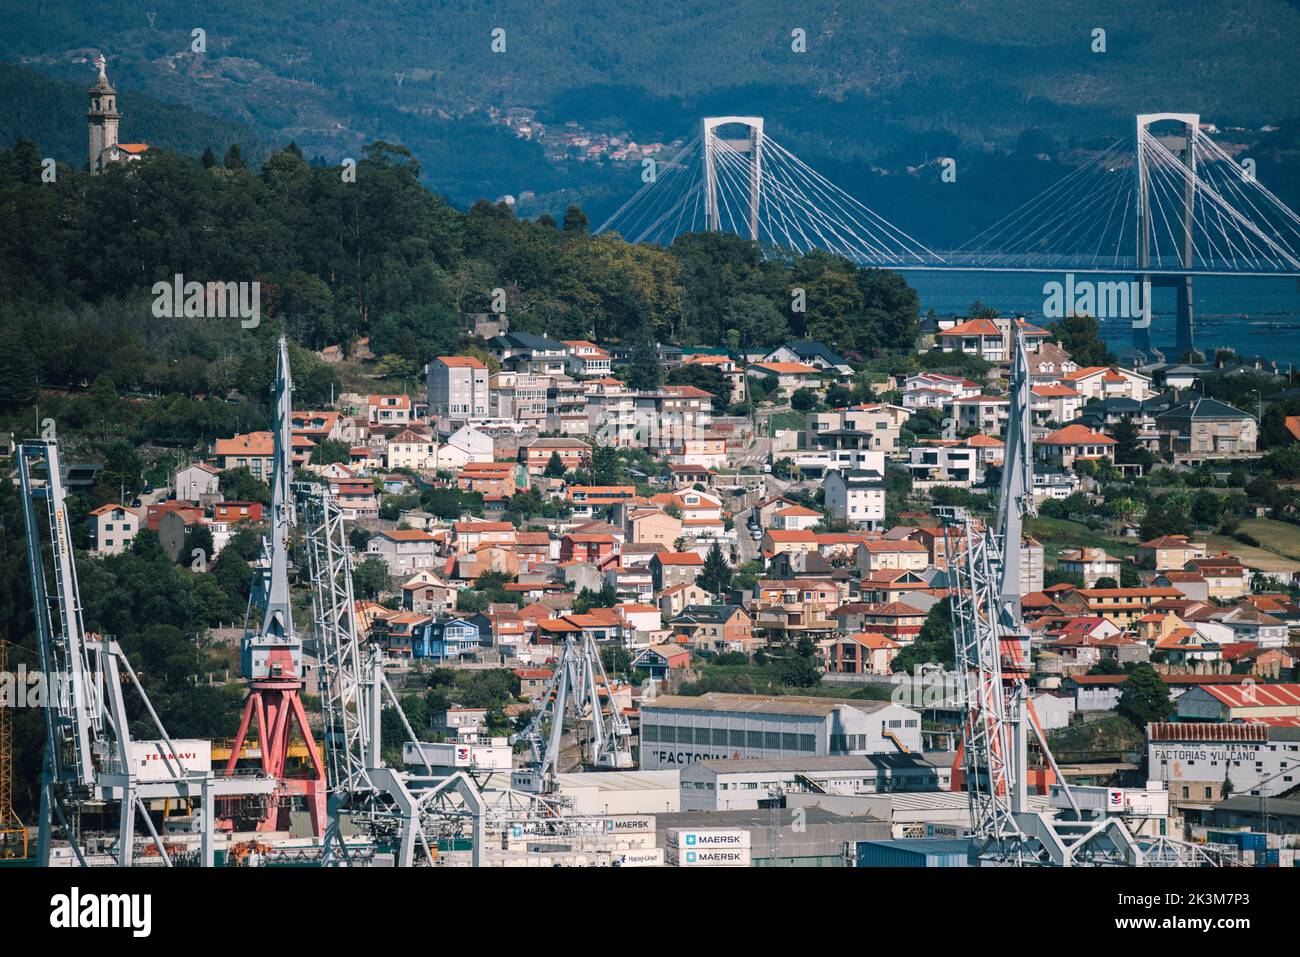 Vigo, Spain - September 24, 2022: High perspective view of Rande bridge in the Vigo estuary, Galicia, Spain with container port in the foreground Stock Photo